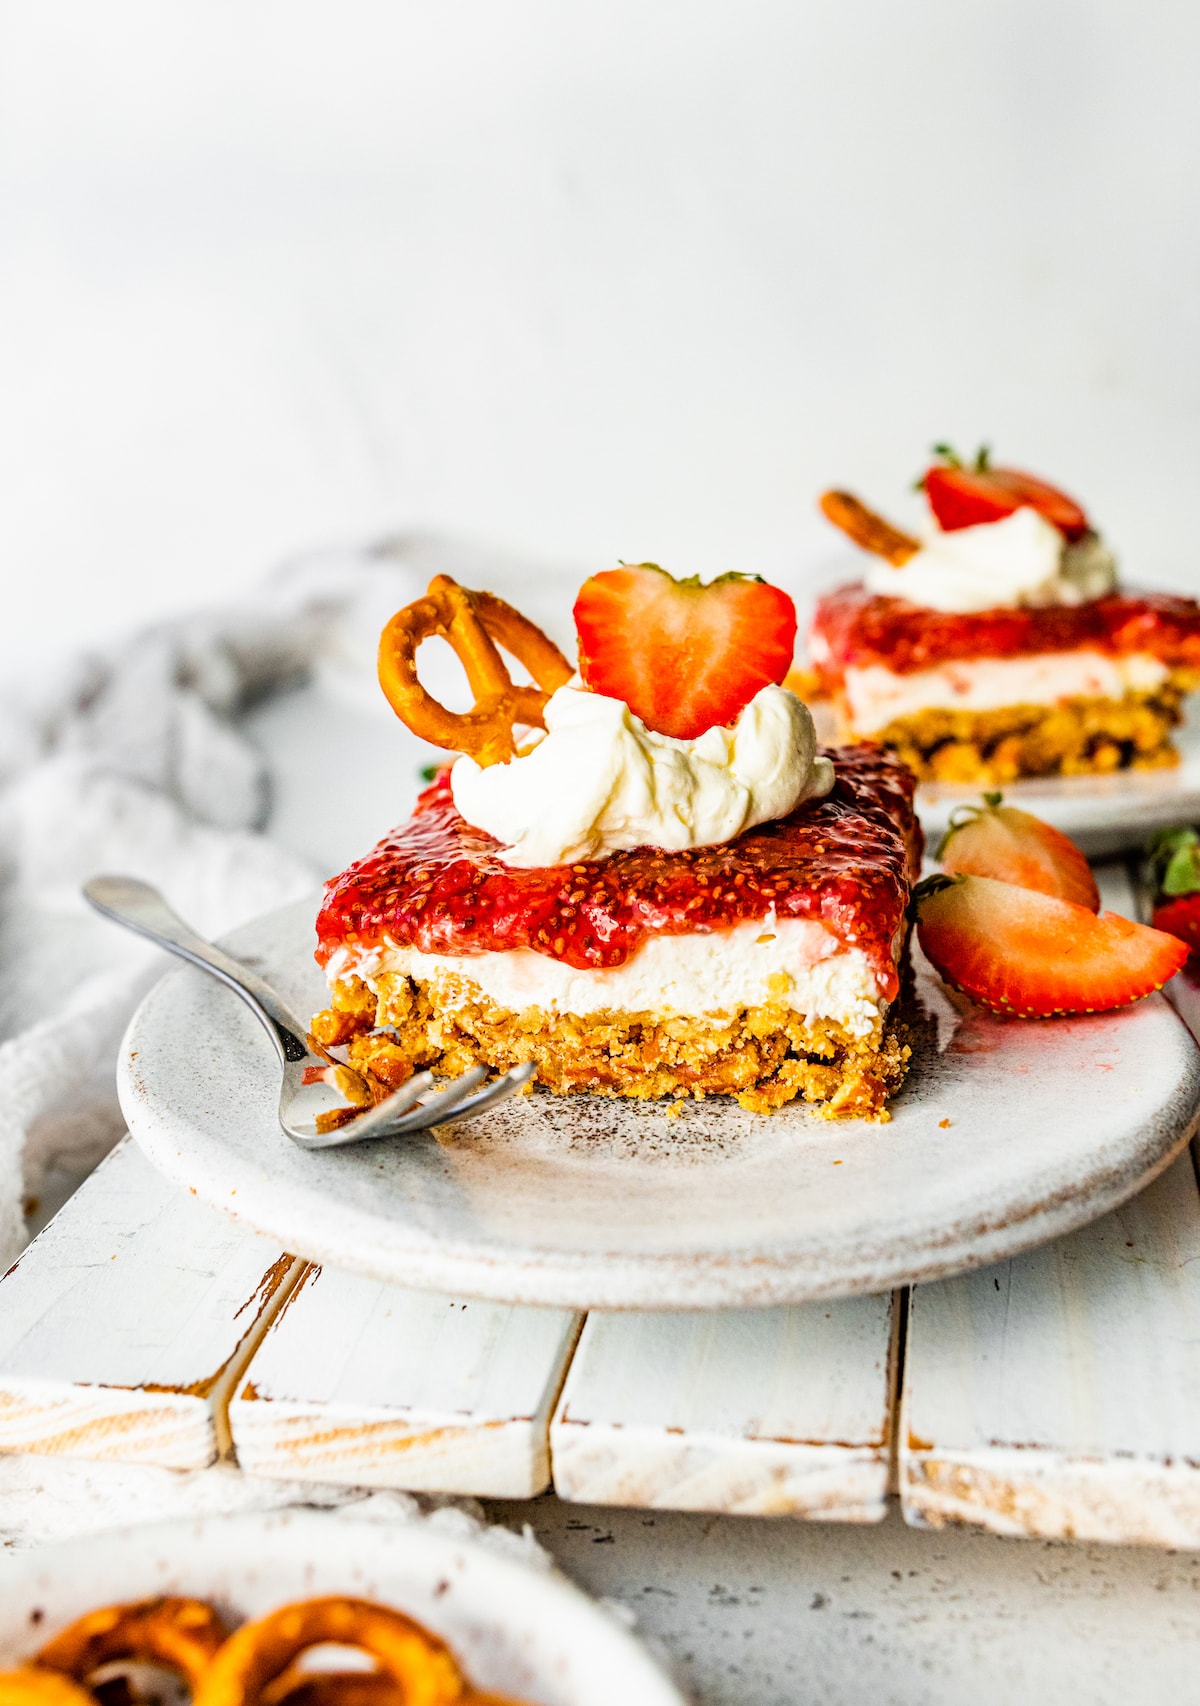 A slice of strawberry pretzel salad on a small plate with a metal fork. The slice is topped with a dollop of whipped cream, a sliced strawberry, and a pretzel.